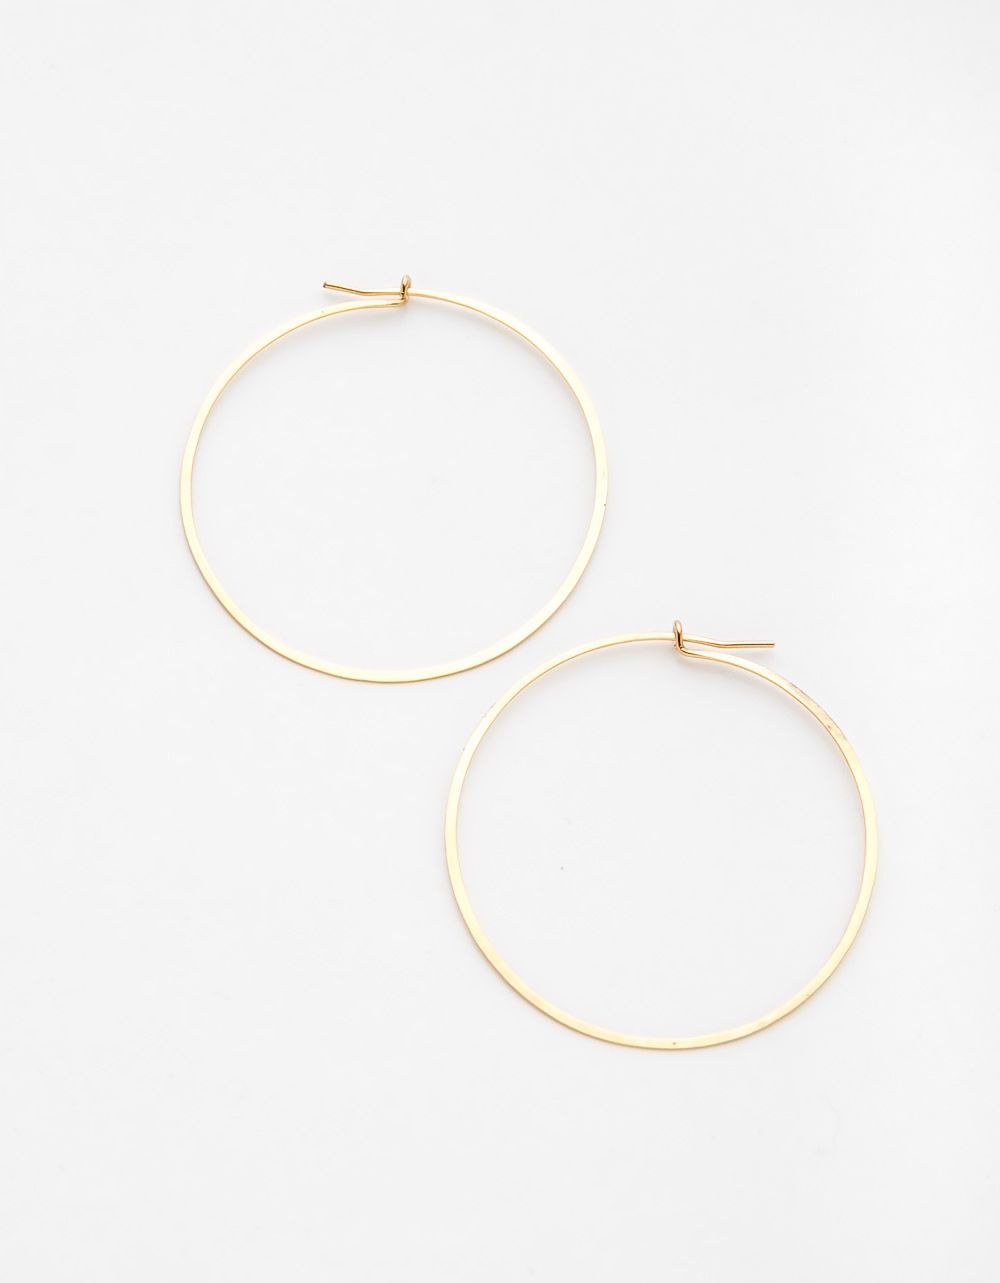 Large Round Hoops in Gold by Jenny Sheriff_0